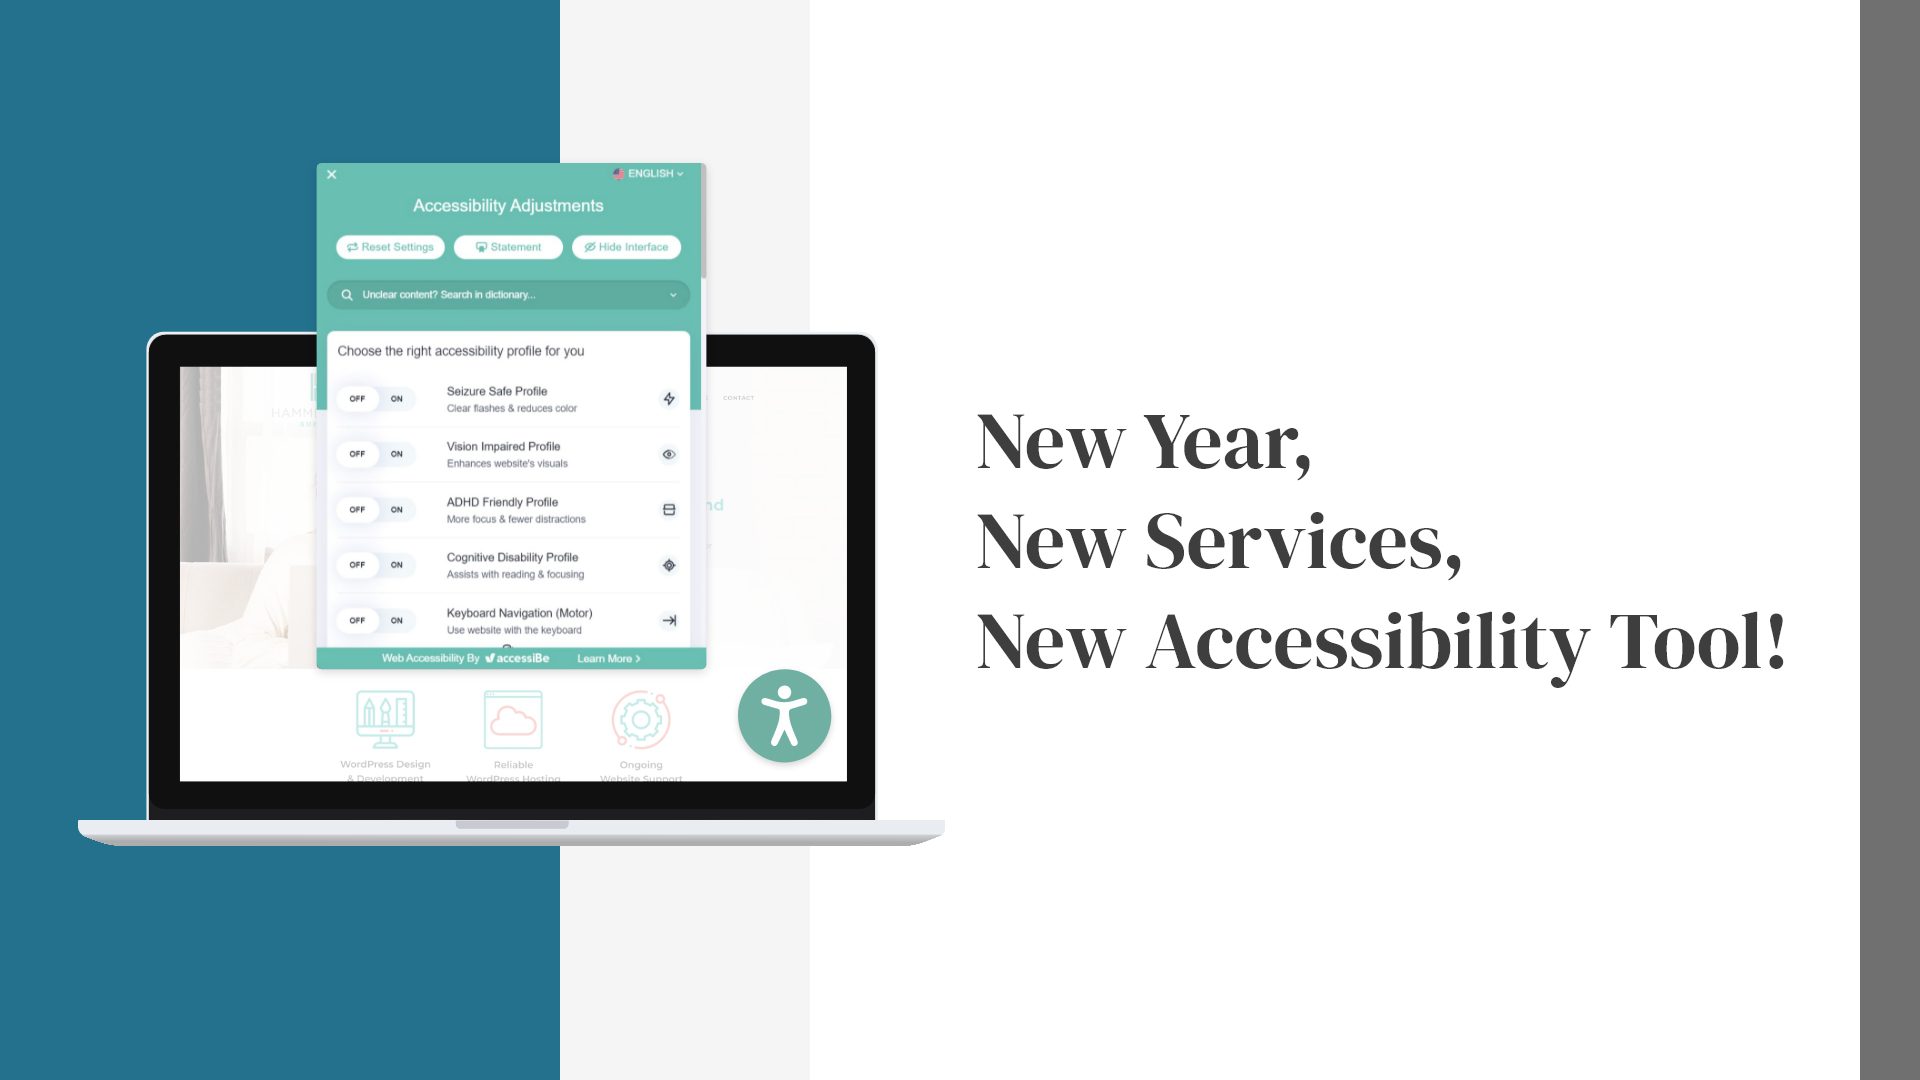 New Year, New Services, New Accessibility Tool!